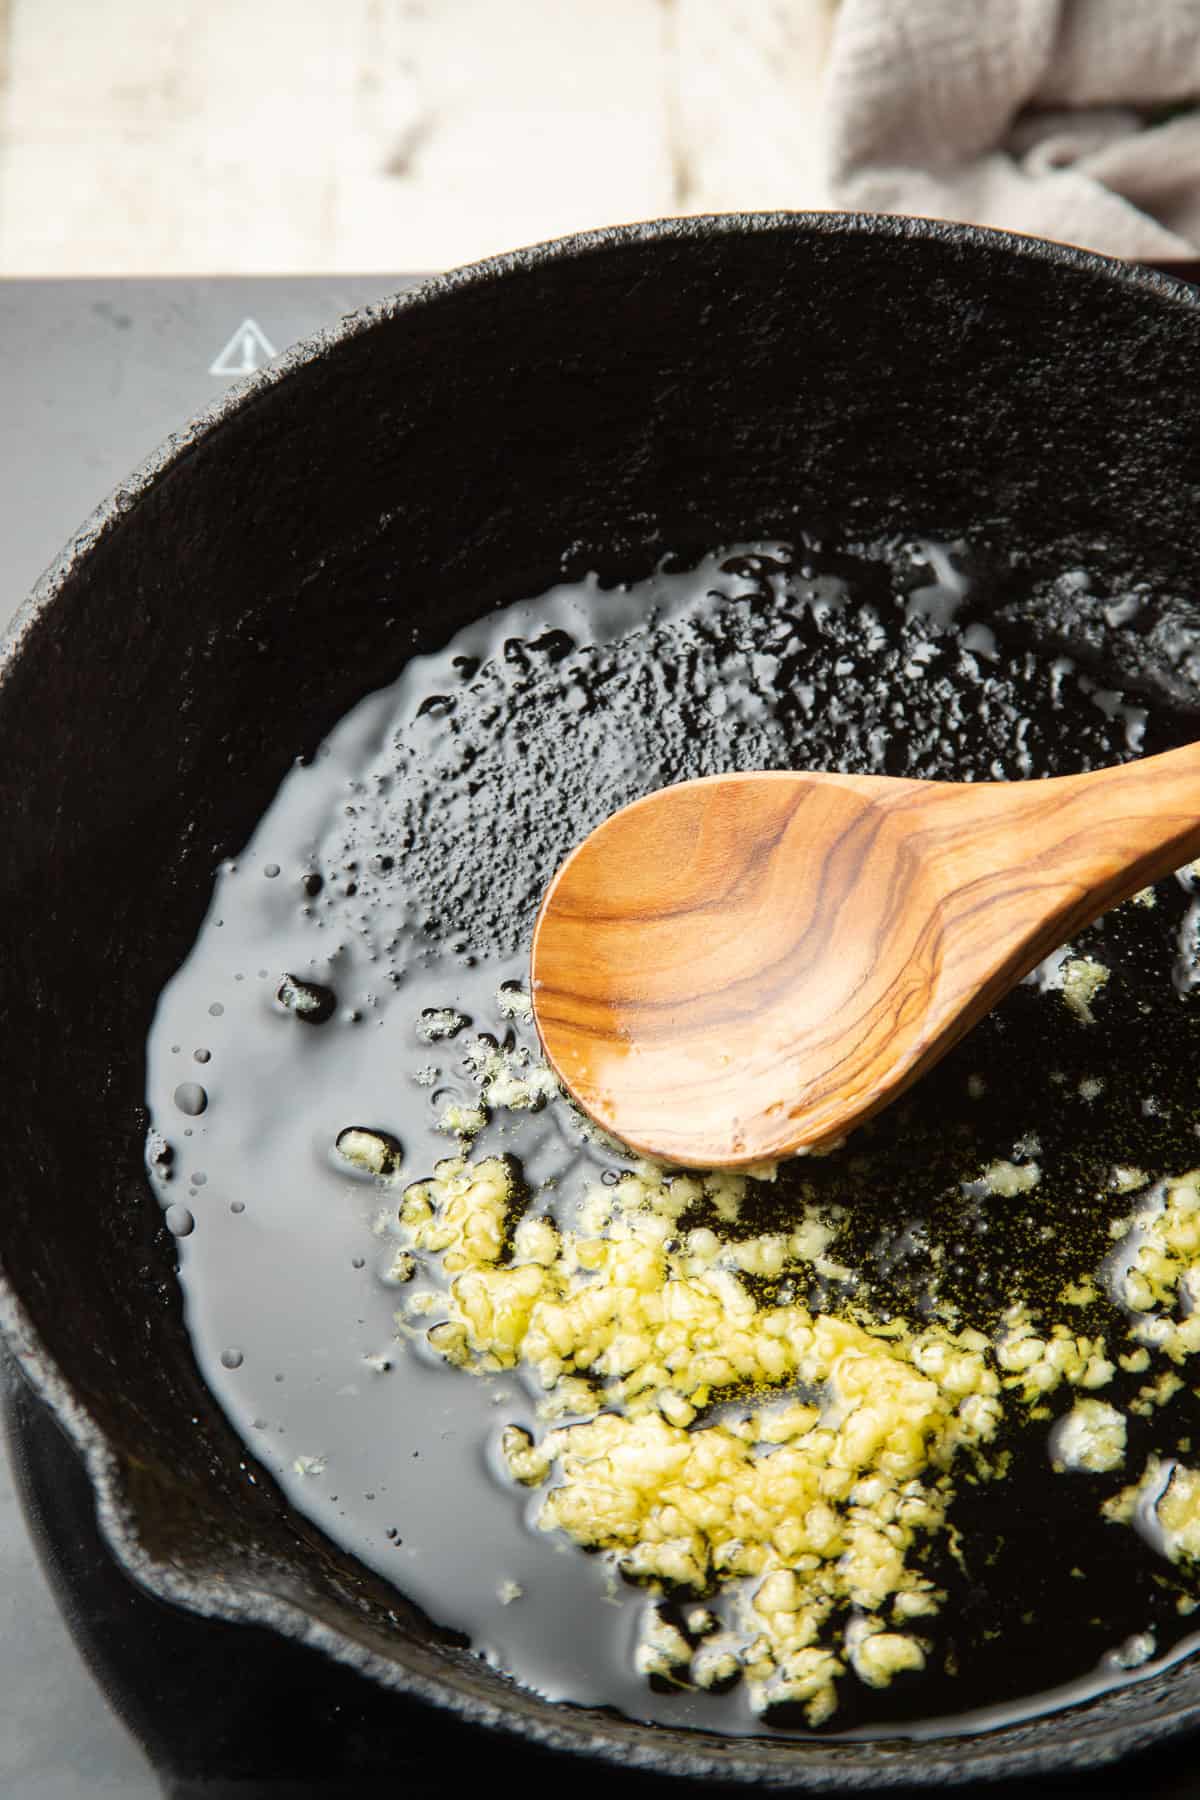 Minced garlic cooking in a skillet with olive oil.